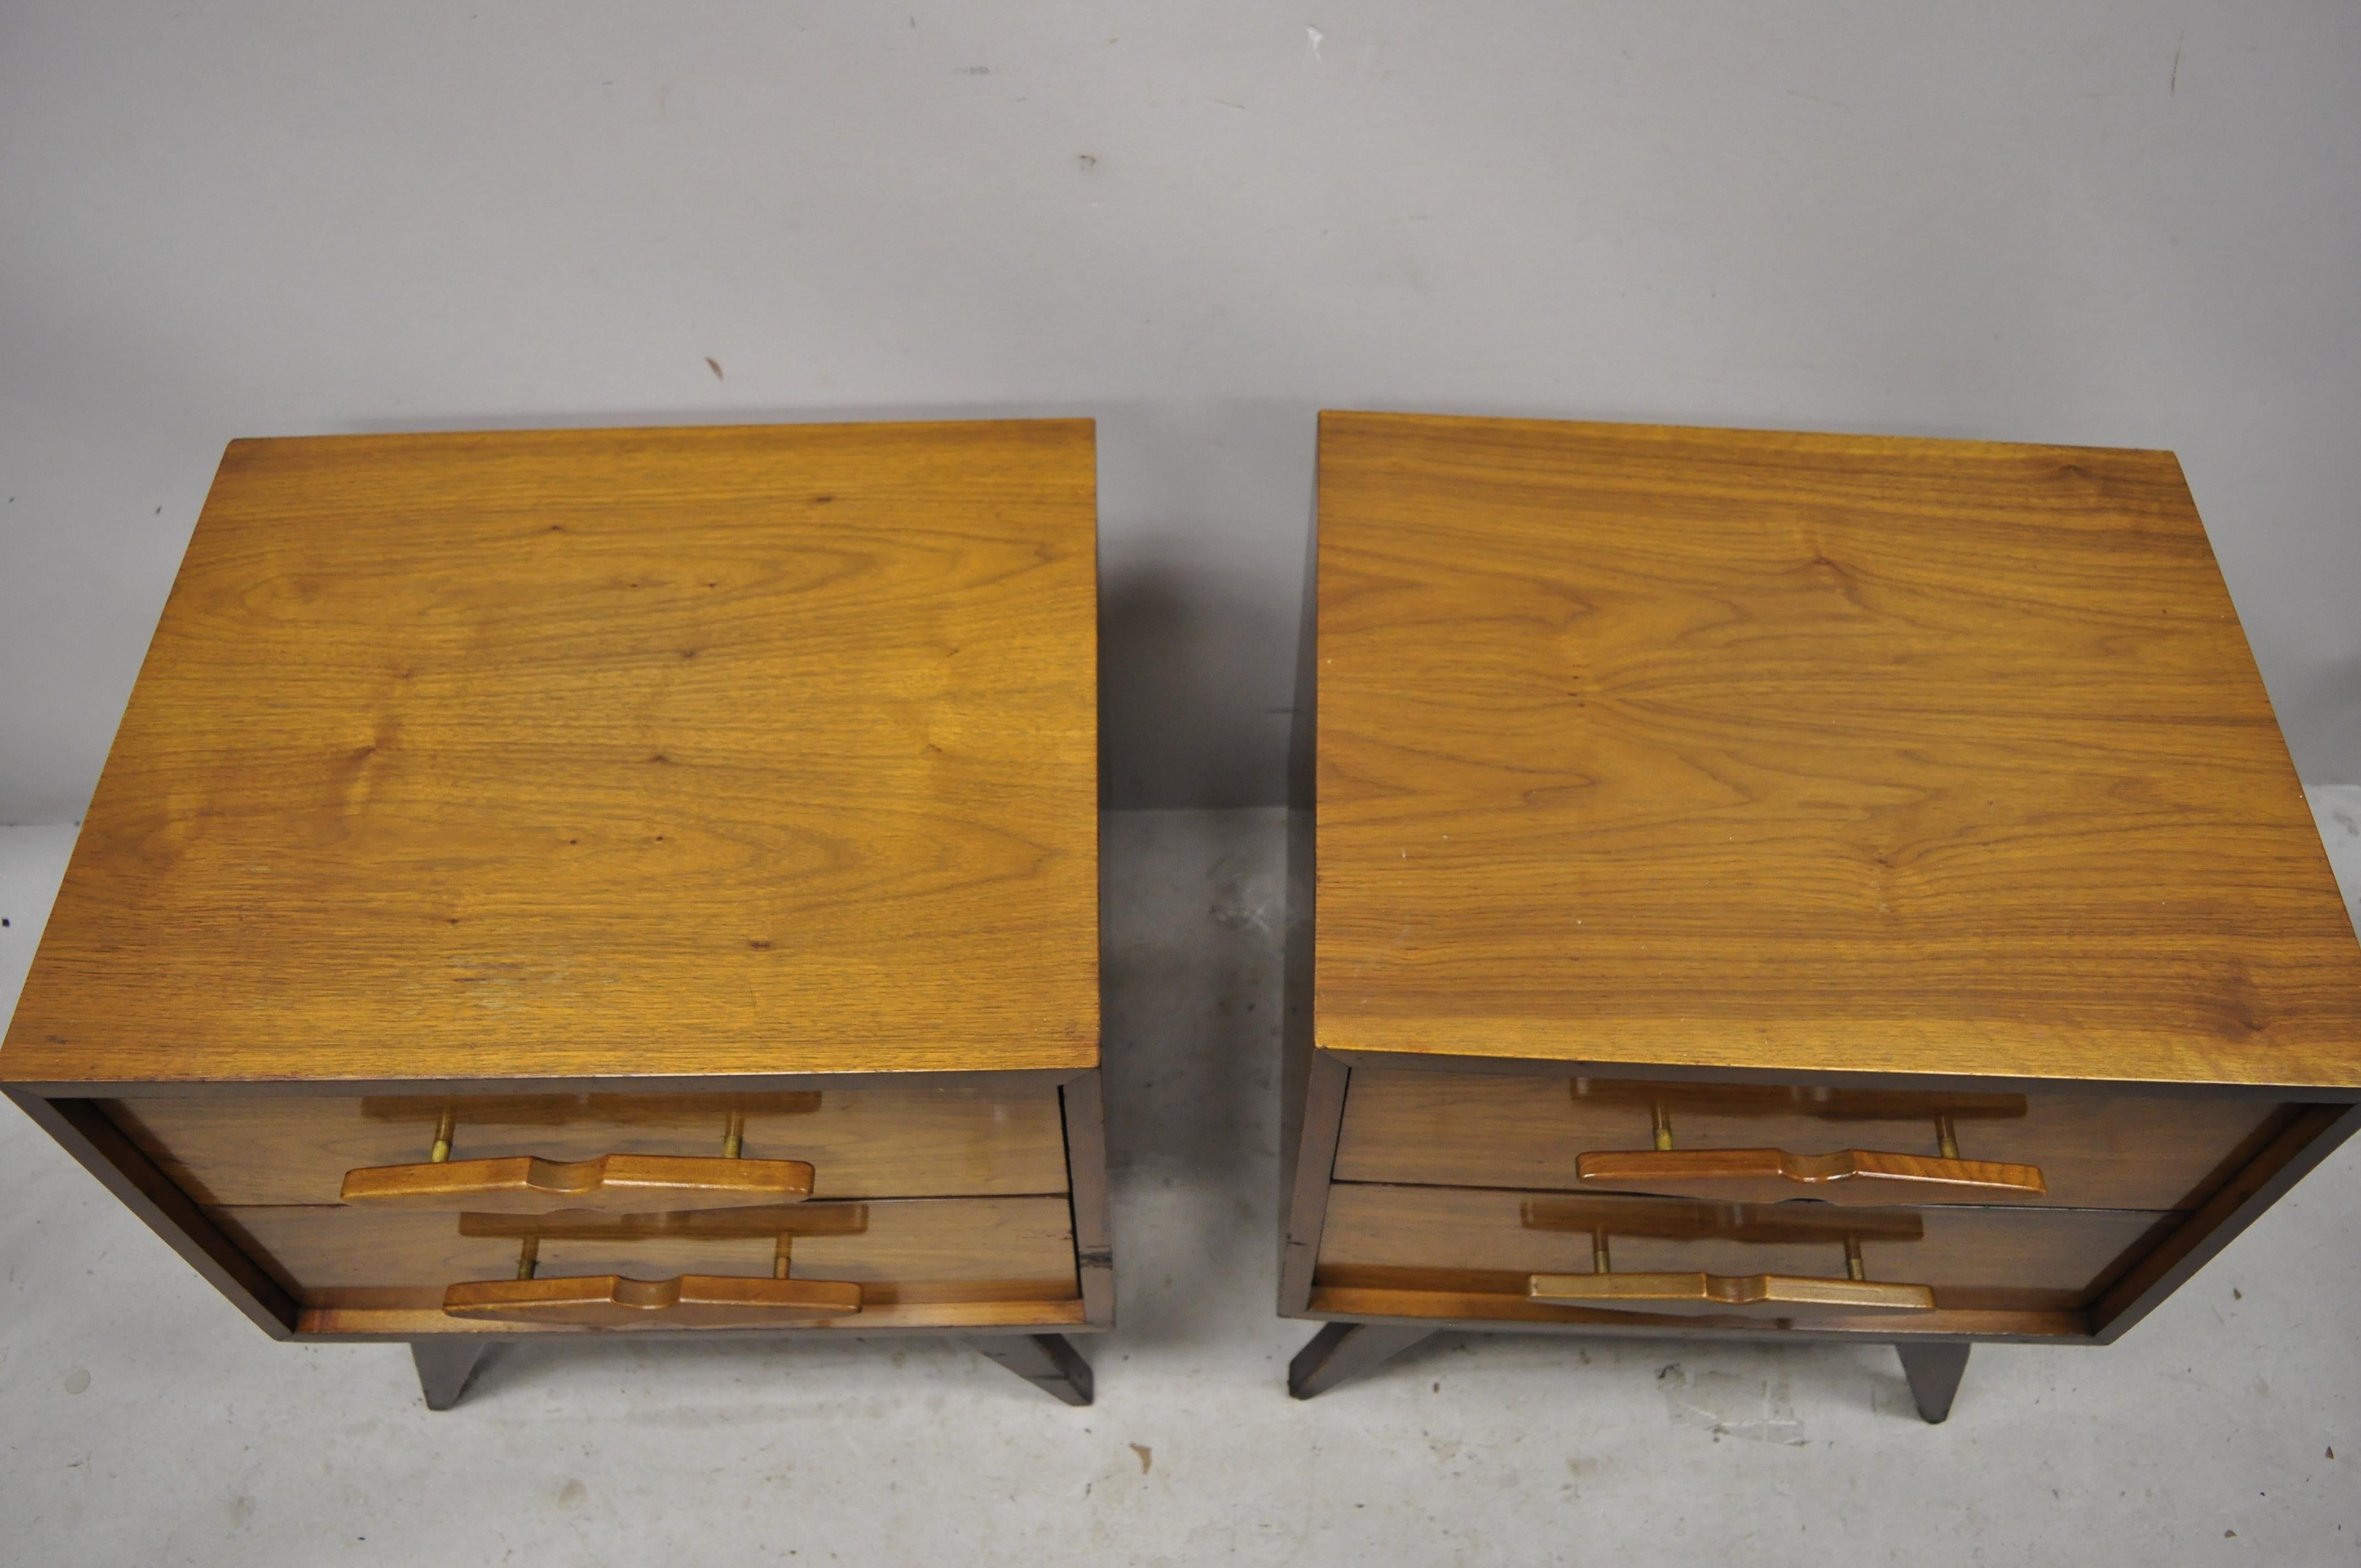 20th Century Mid-Century Modern Sculpted Walnut Two-Drawer Nightstands Bedside Tables, Pair